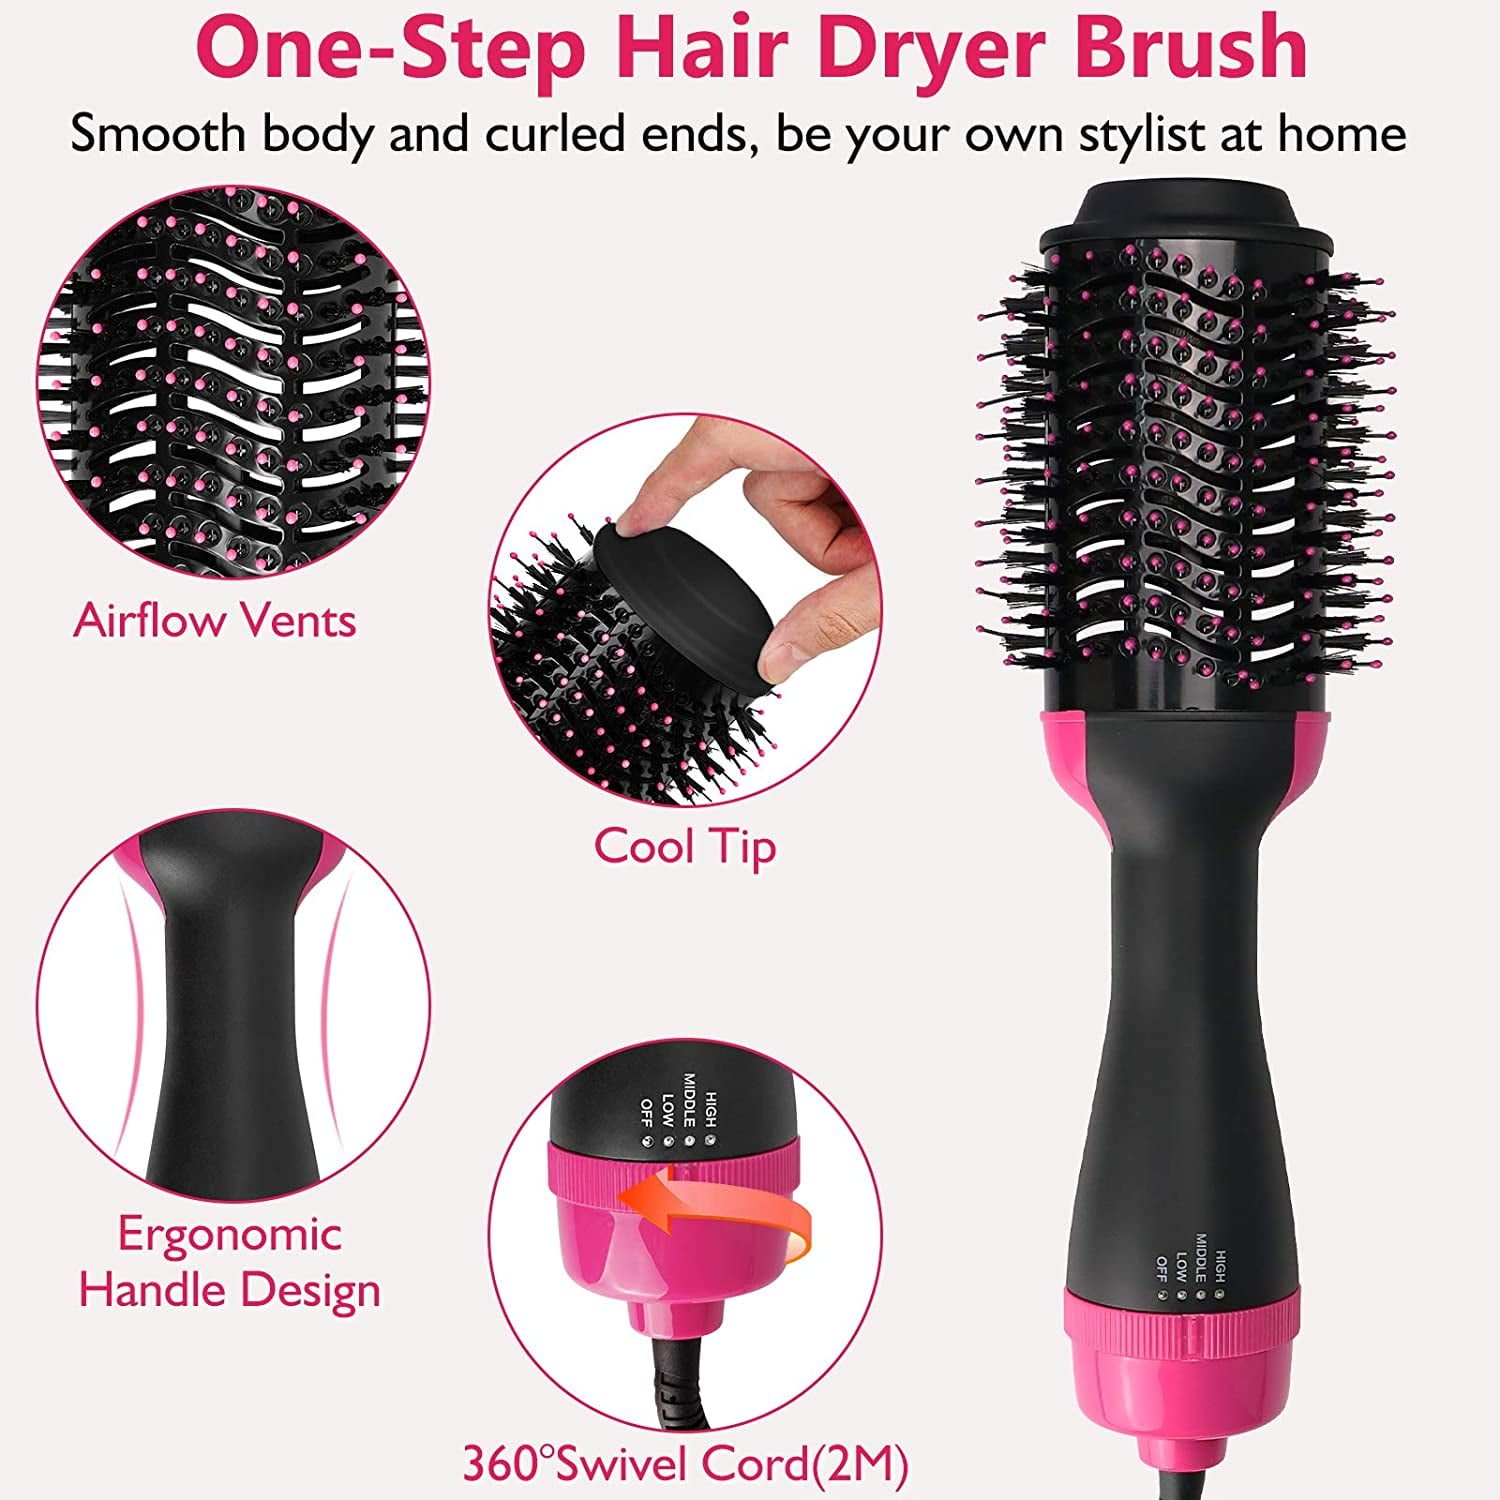 Siwtok One Step Hair Dryer Brush,Blow Dryer Brush,Professional Hot Air  Brush for Women with Negative Ions,1200W(Pink) 4 Piece Set